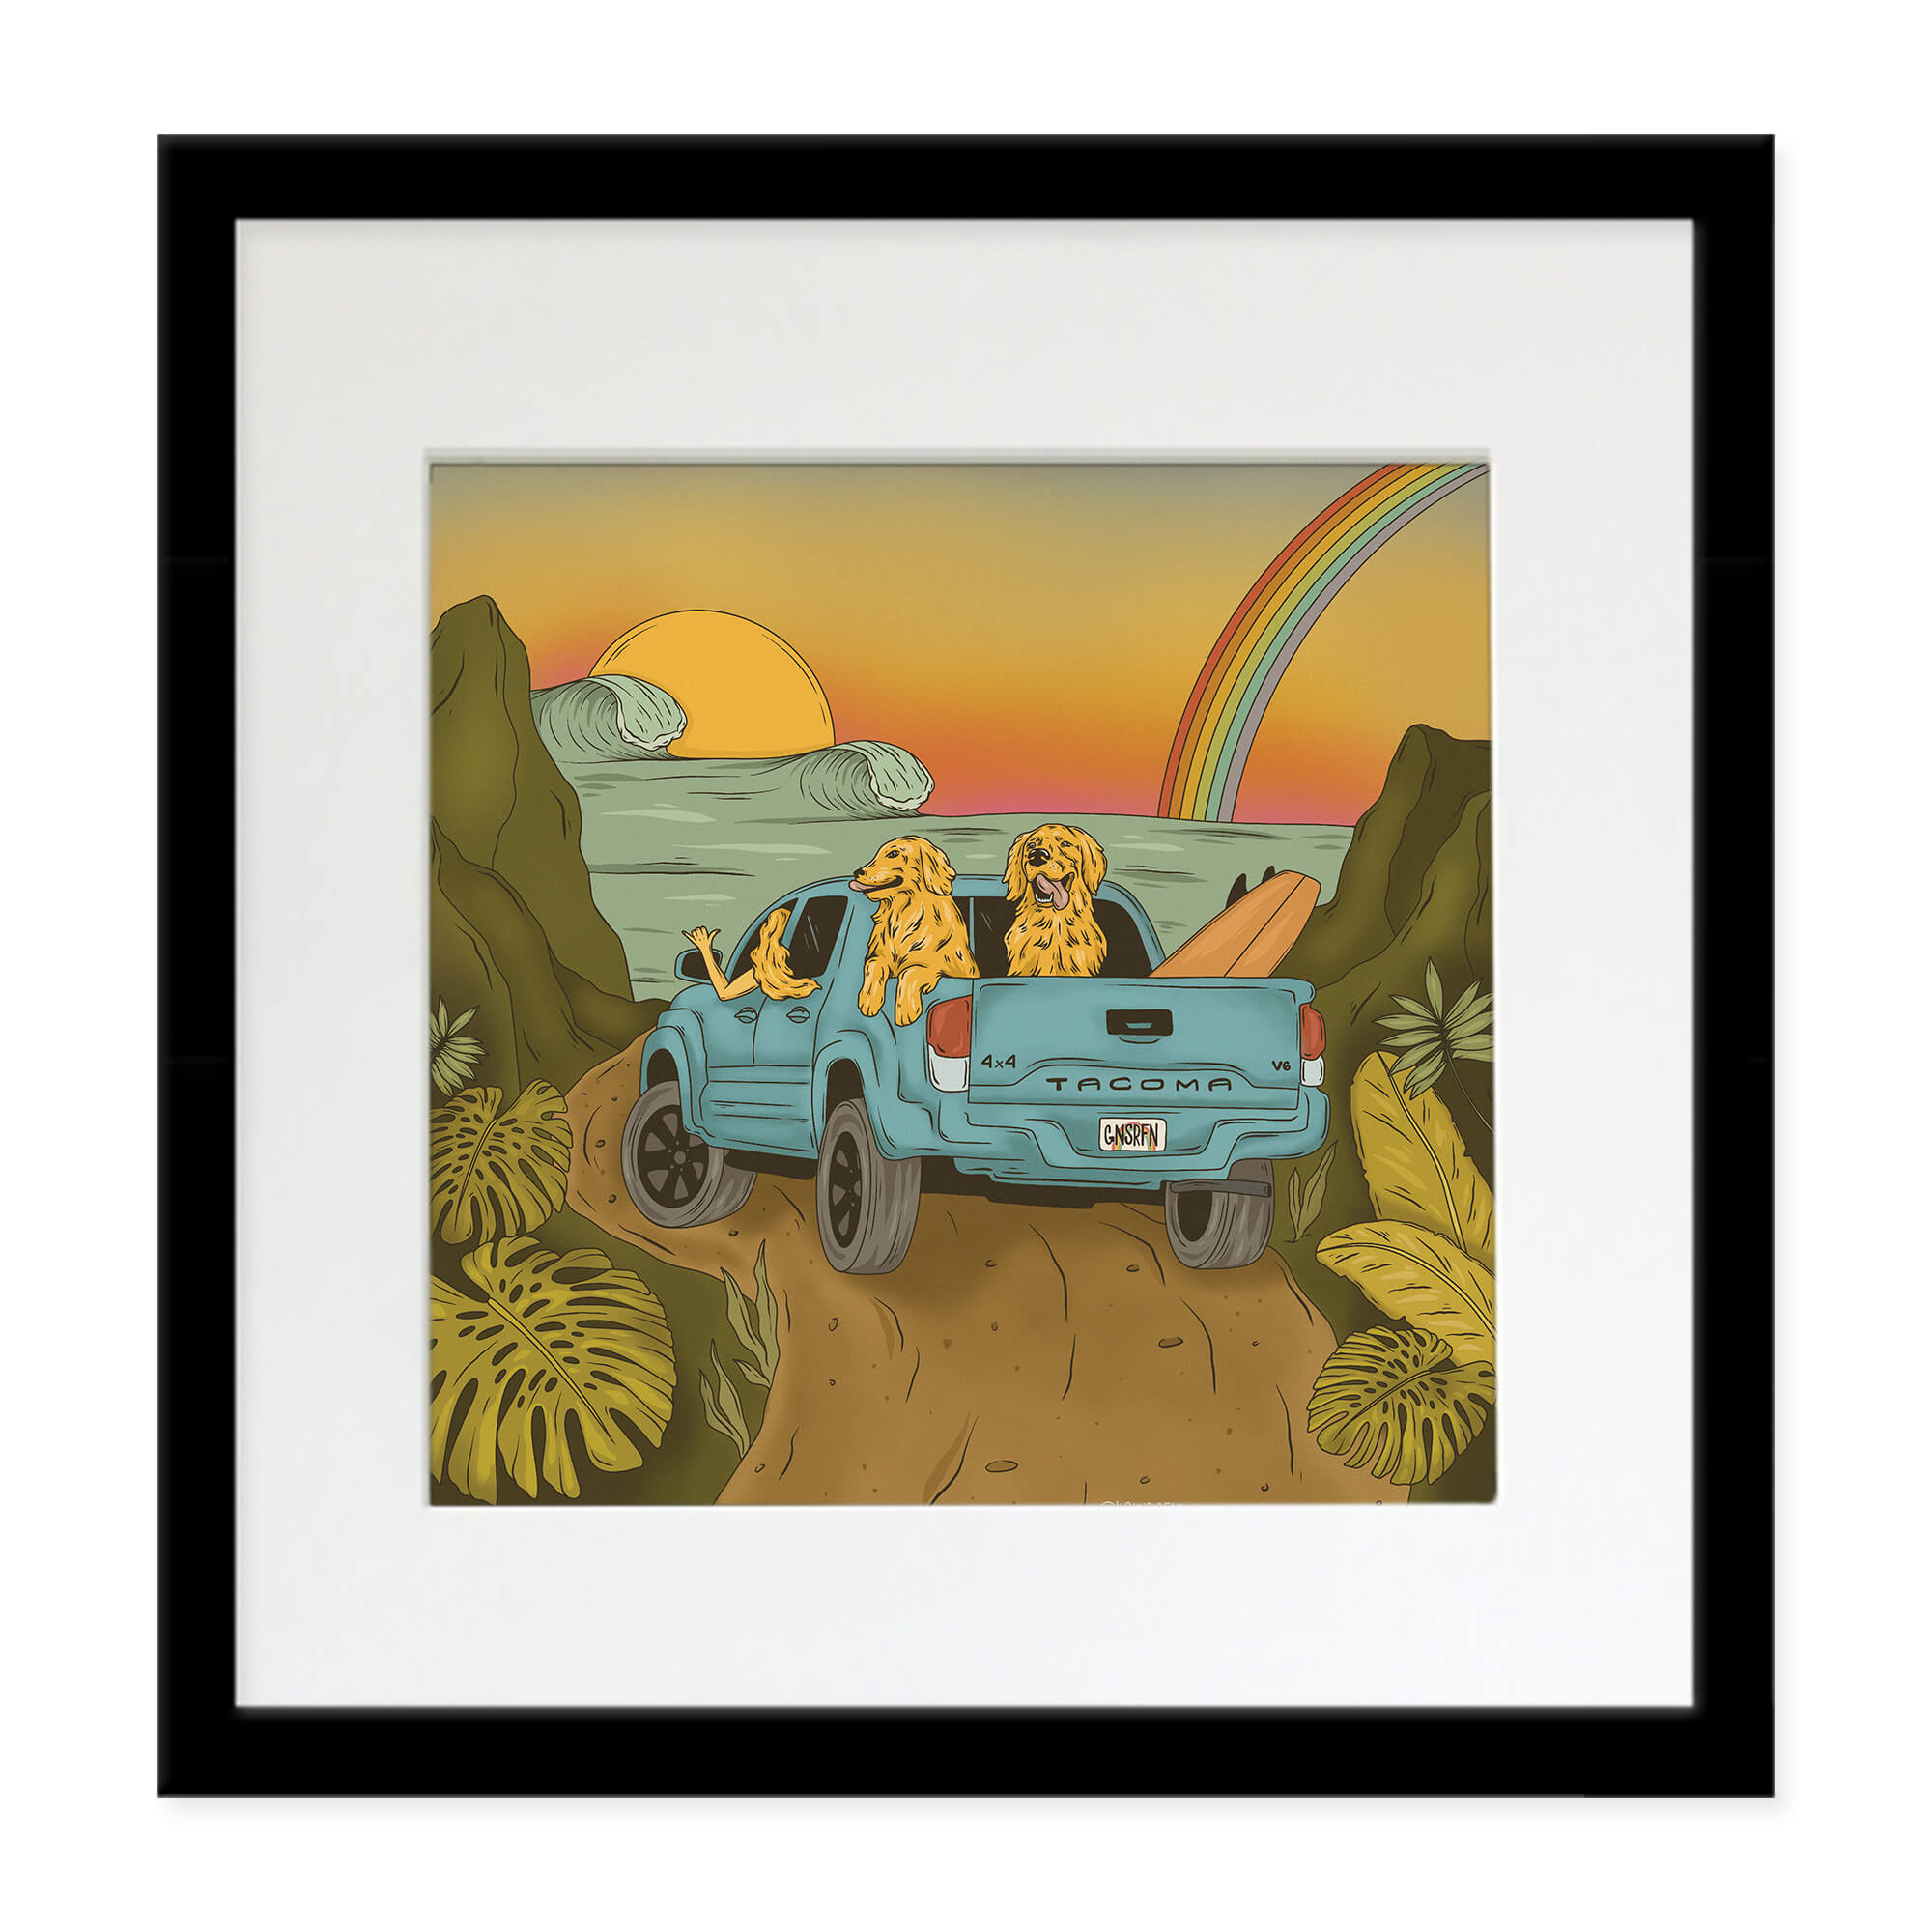 Matted art print of a truck heading to the beach with a beautiful sunset by Hawaii artist Laihha Organna